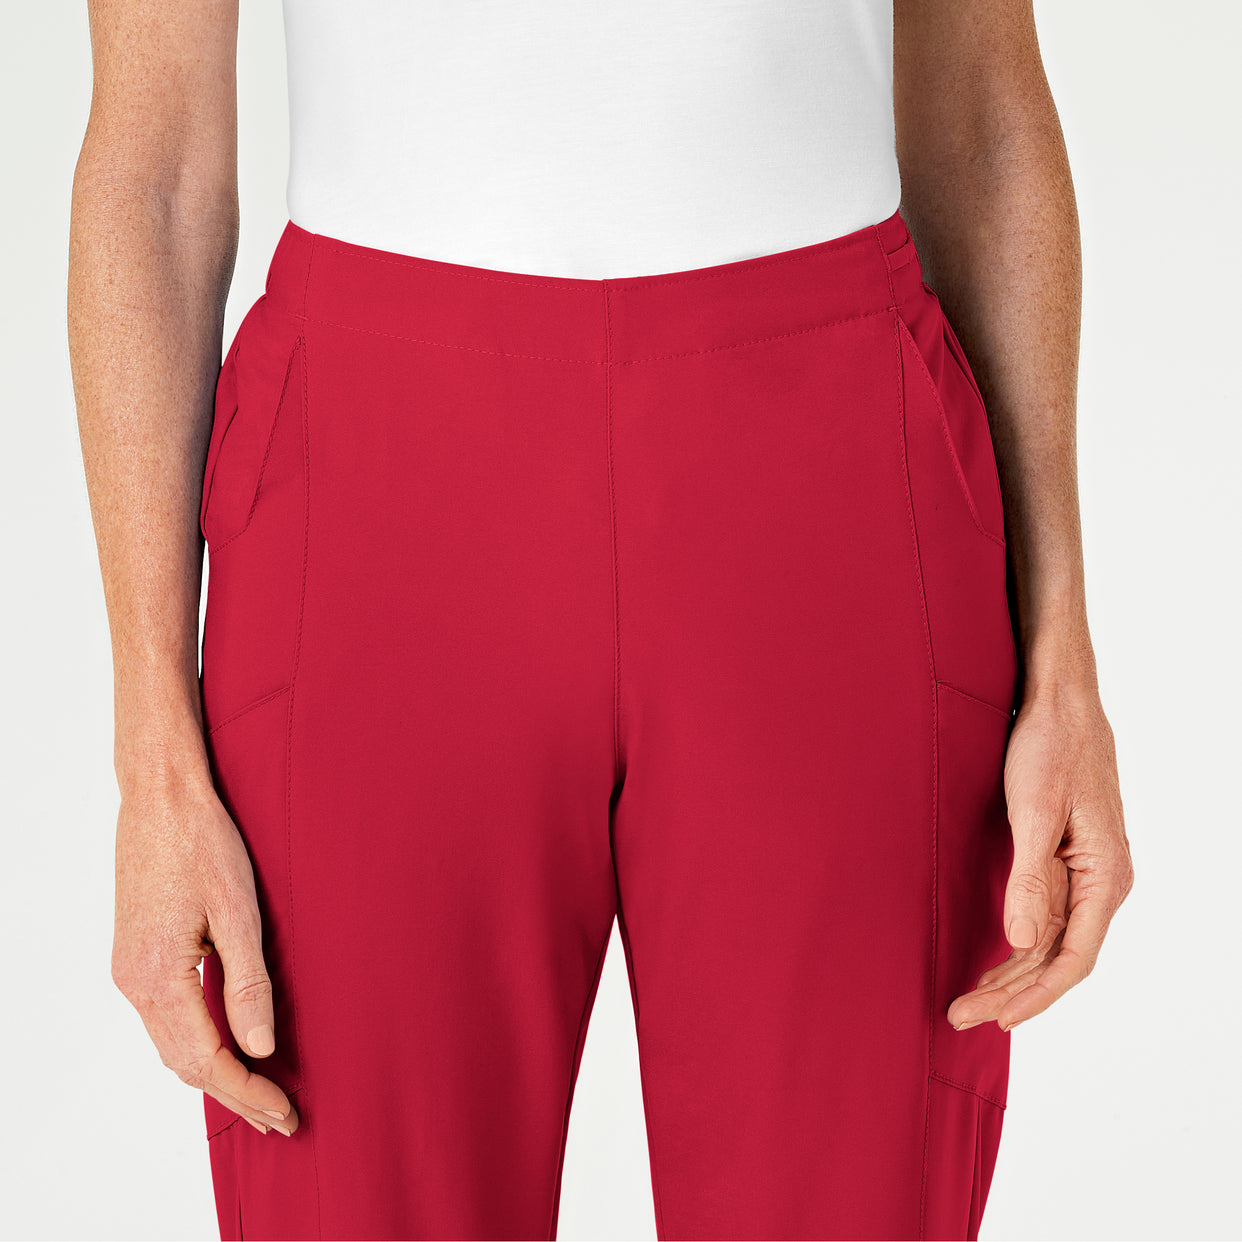 W123 Women's Flat Front Cargo Scrub Pant Red front detail